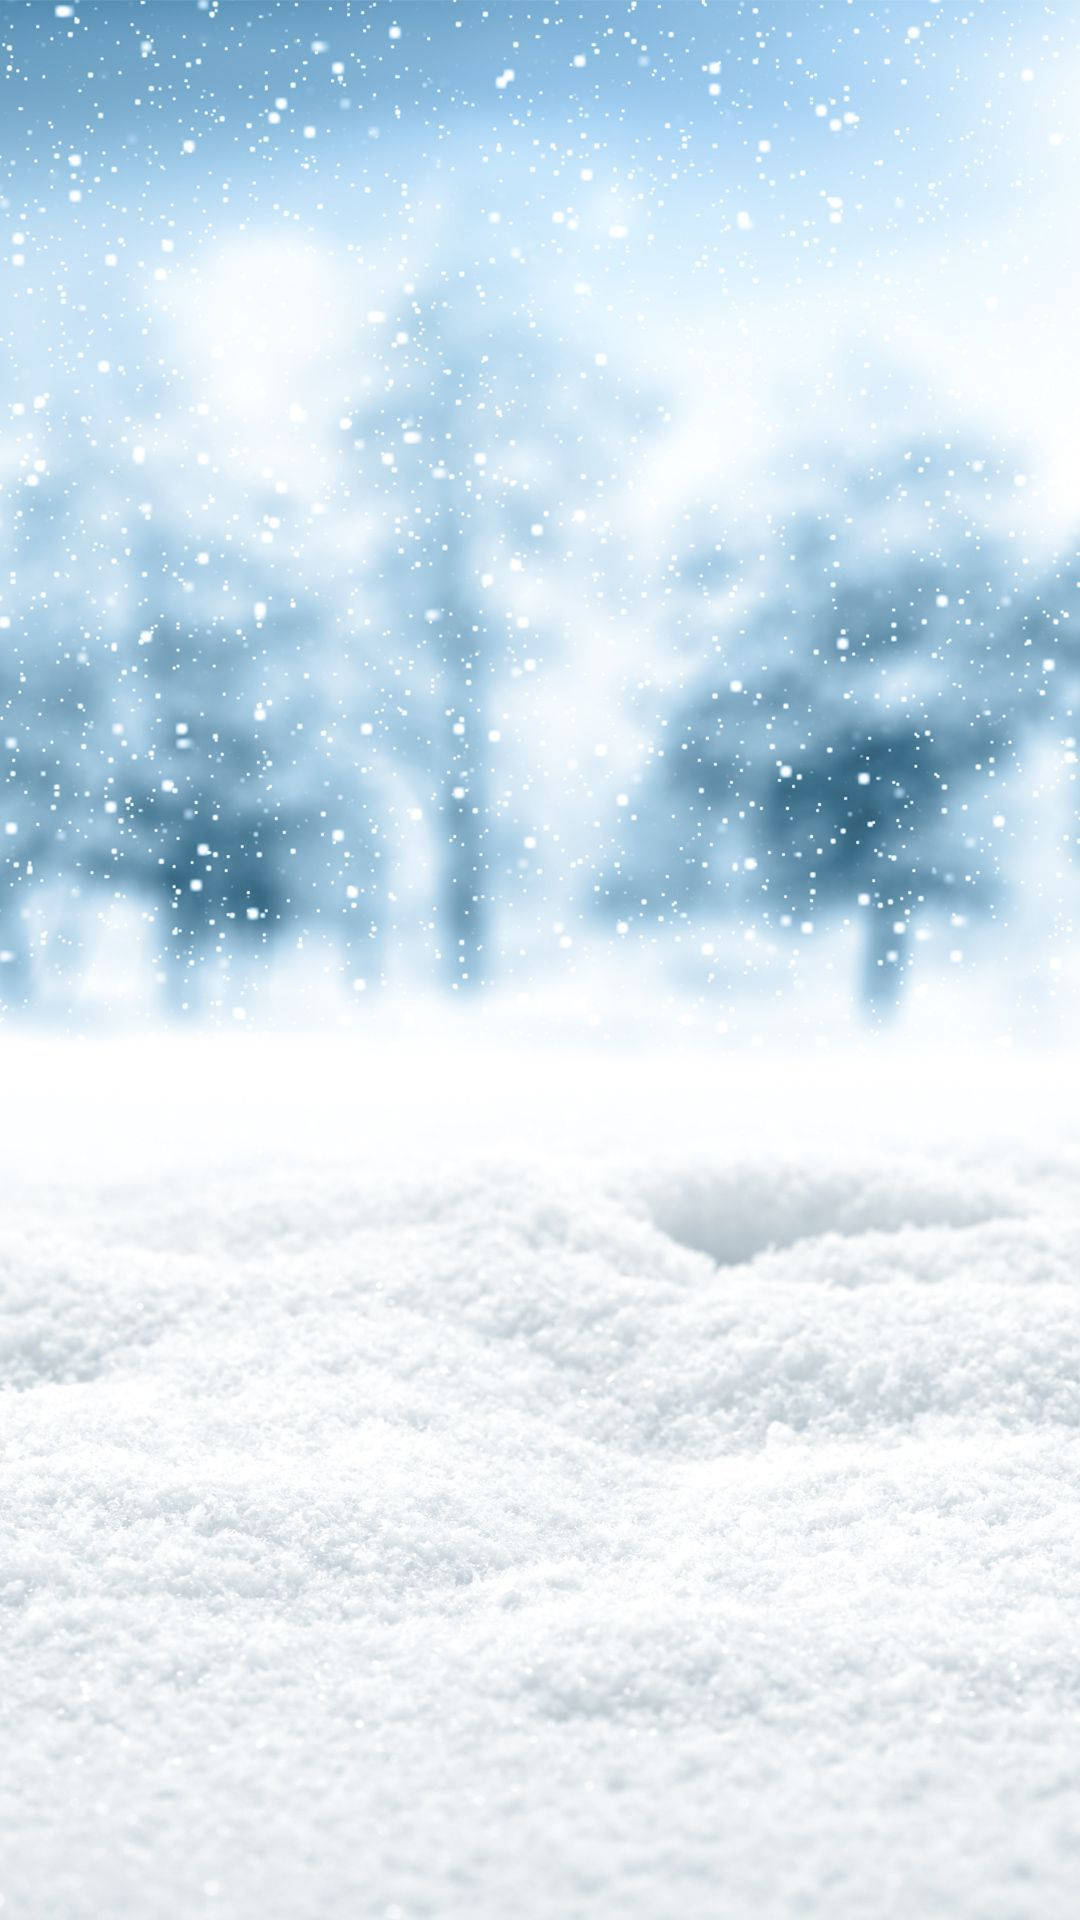 Download White Falling Snow Winter iPhone Wallpaper